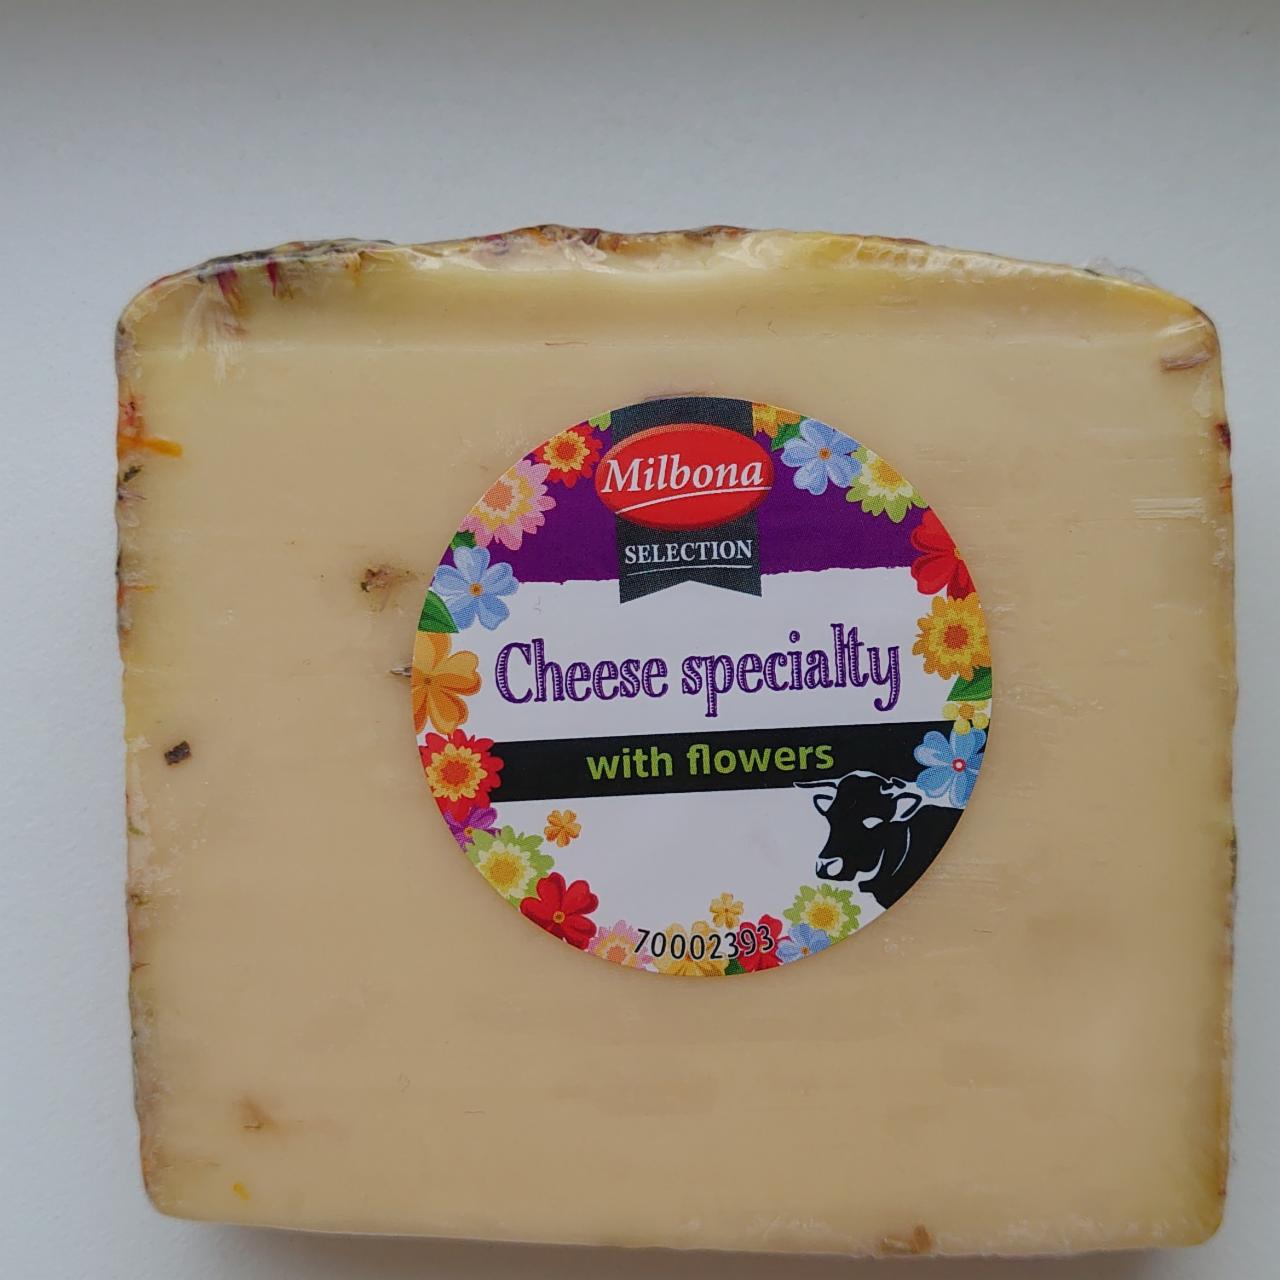 Fotografie - Cheese specialty with flowers Milbona